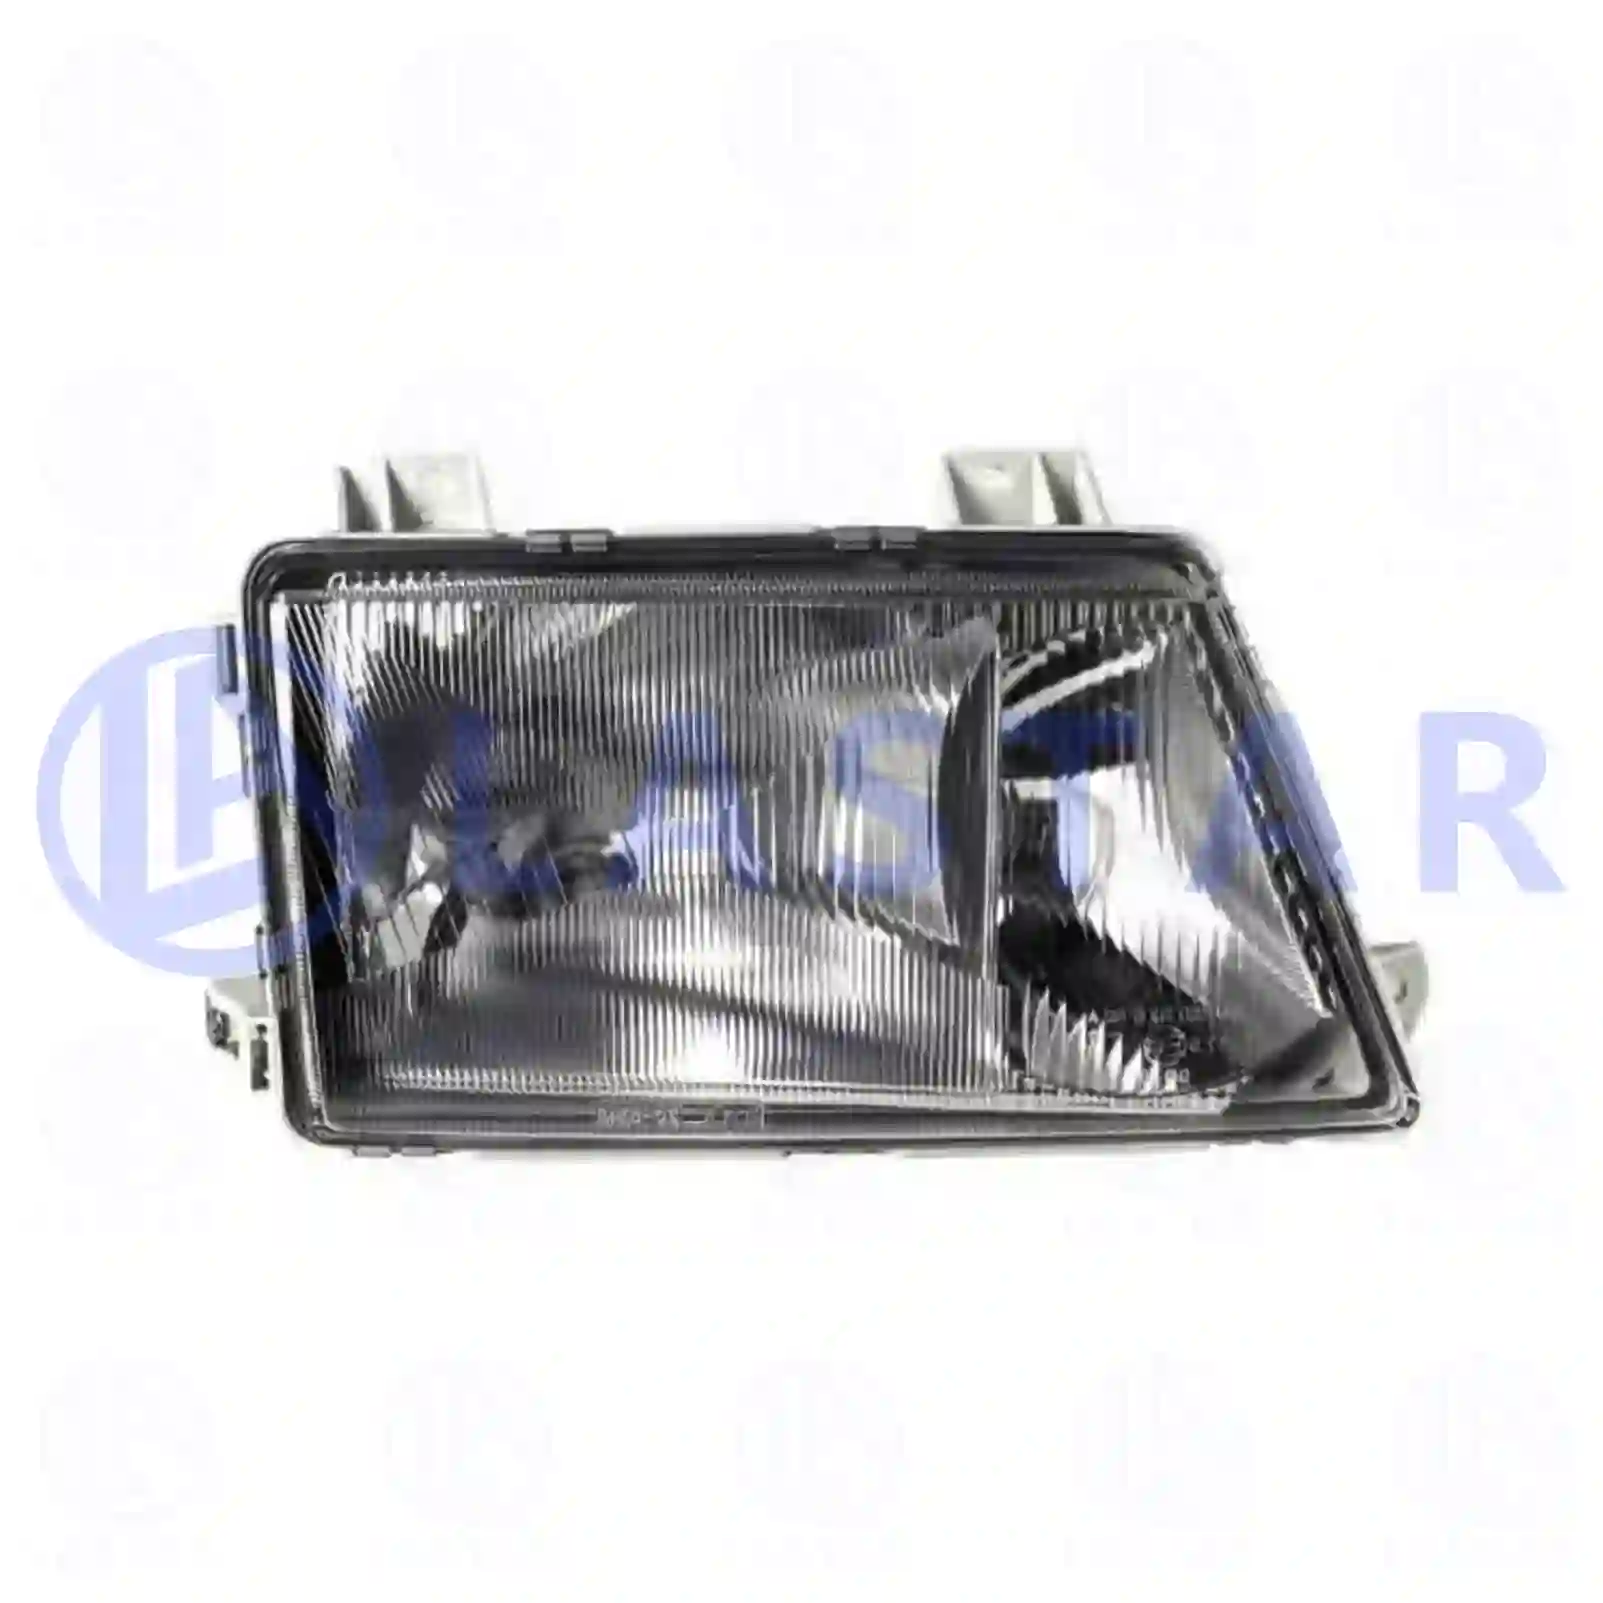 Headlamp, right, without bulbs, 77710805, 9018200261, , , , , , , ||  77710805 Lastar Spare Part | Truck Spare Parts, Auotomotive Spare Parts Headlamp, right, without bulbs, 77710805, 9018200261, , , , , , , ||  77710805 Lastar Spare Part | Truck Spare Parts, Auotomotive Spare Parts